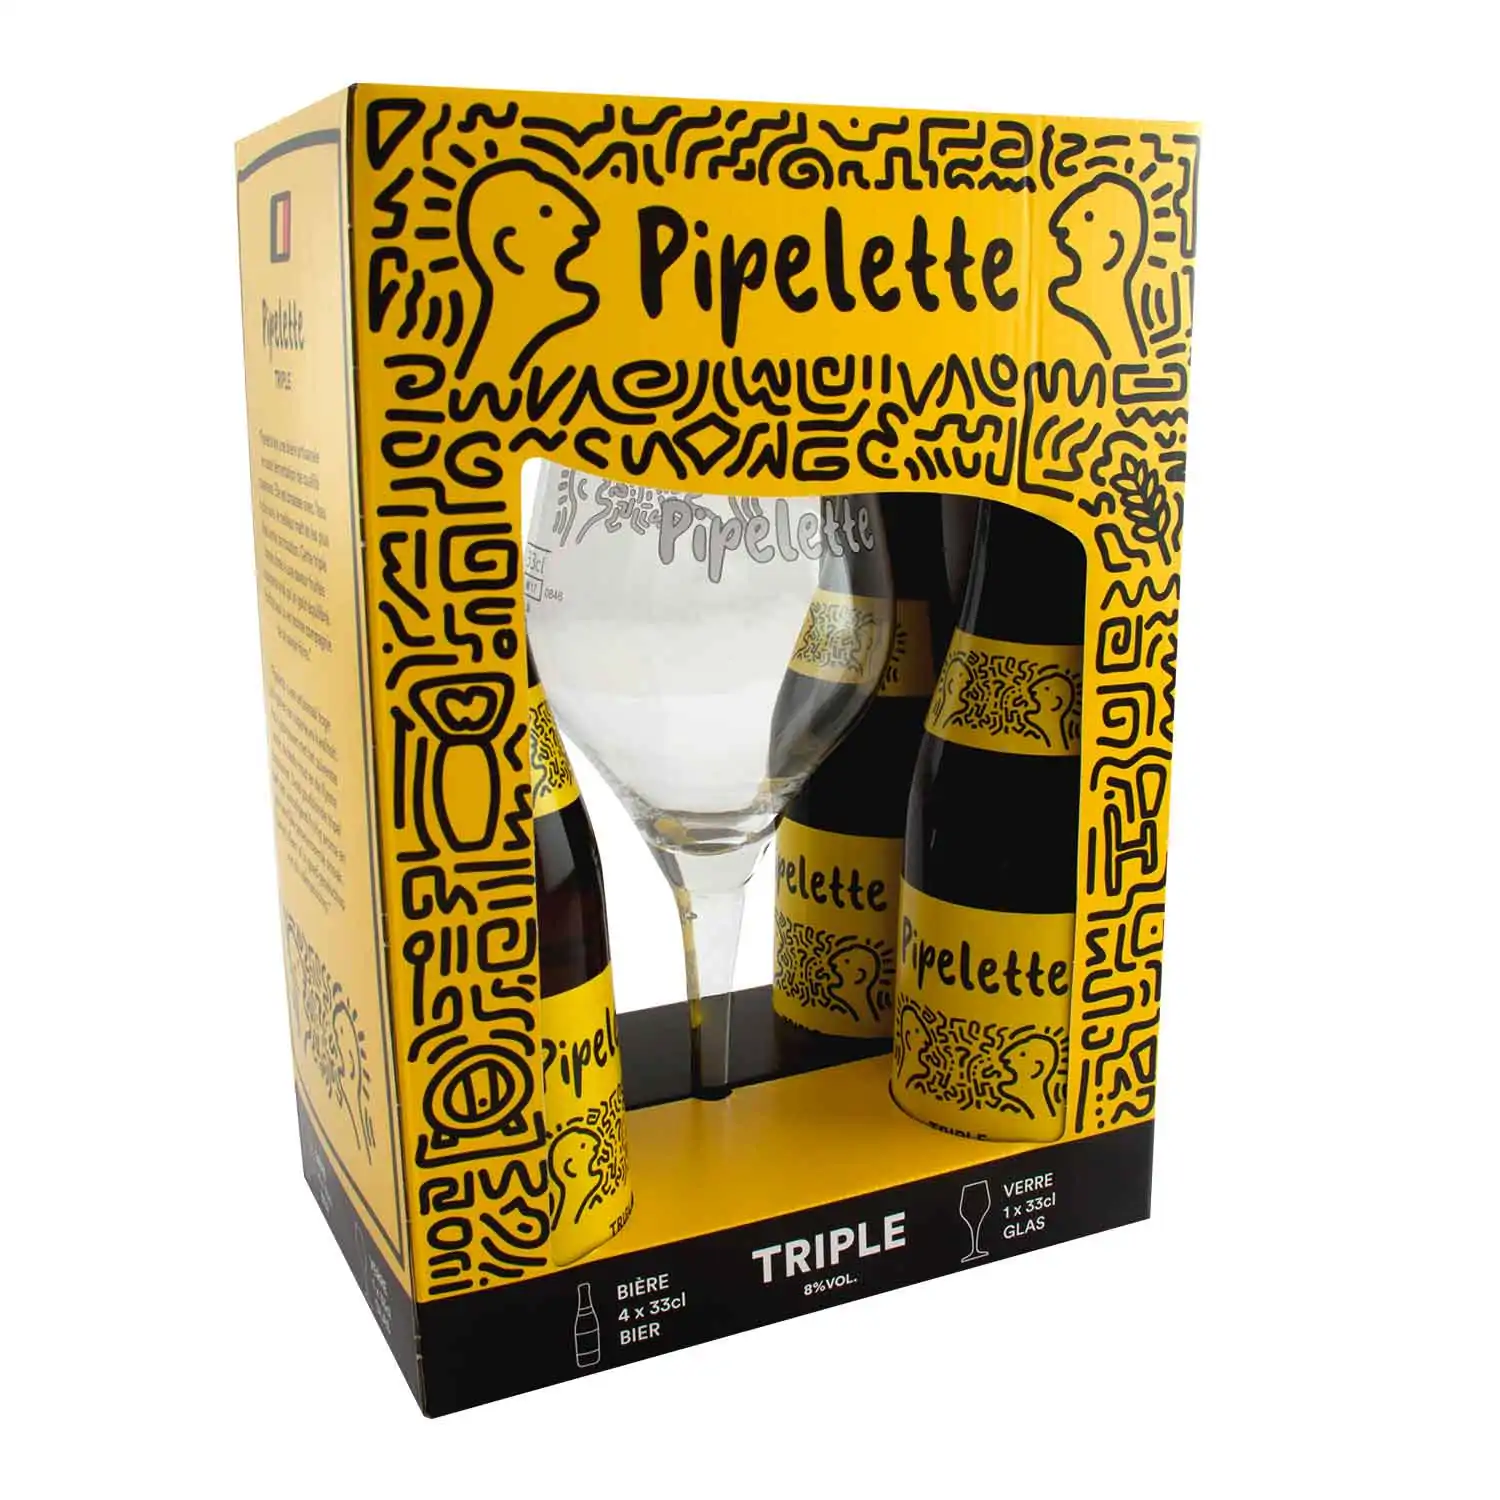 Pipelette triple 4x33cl+verre - Buy at Real Tobacco